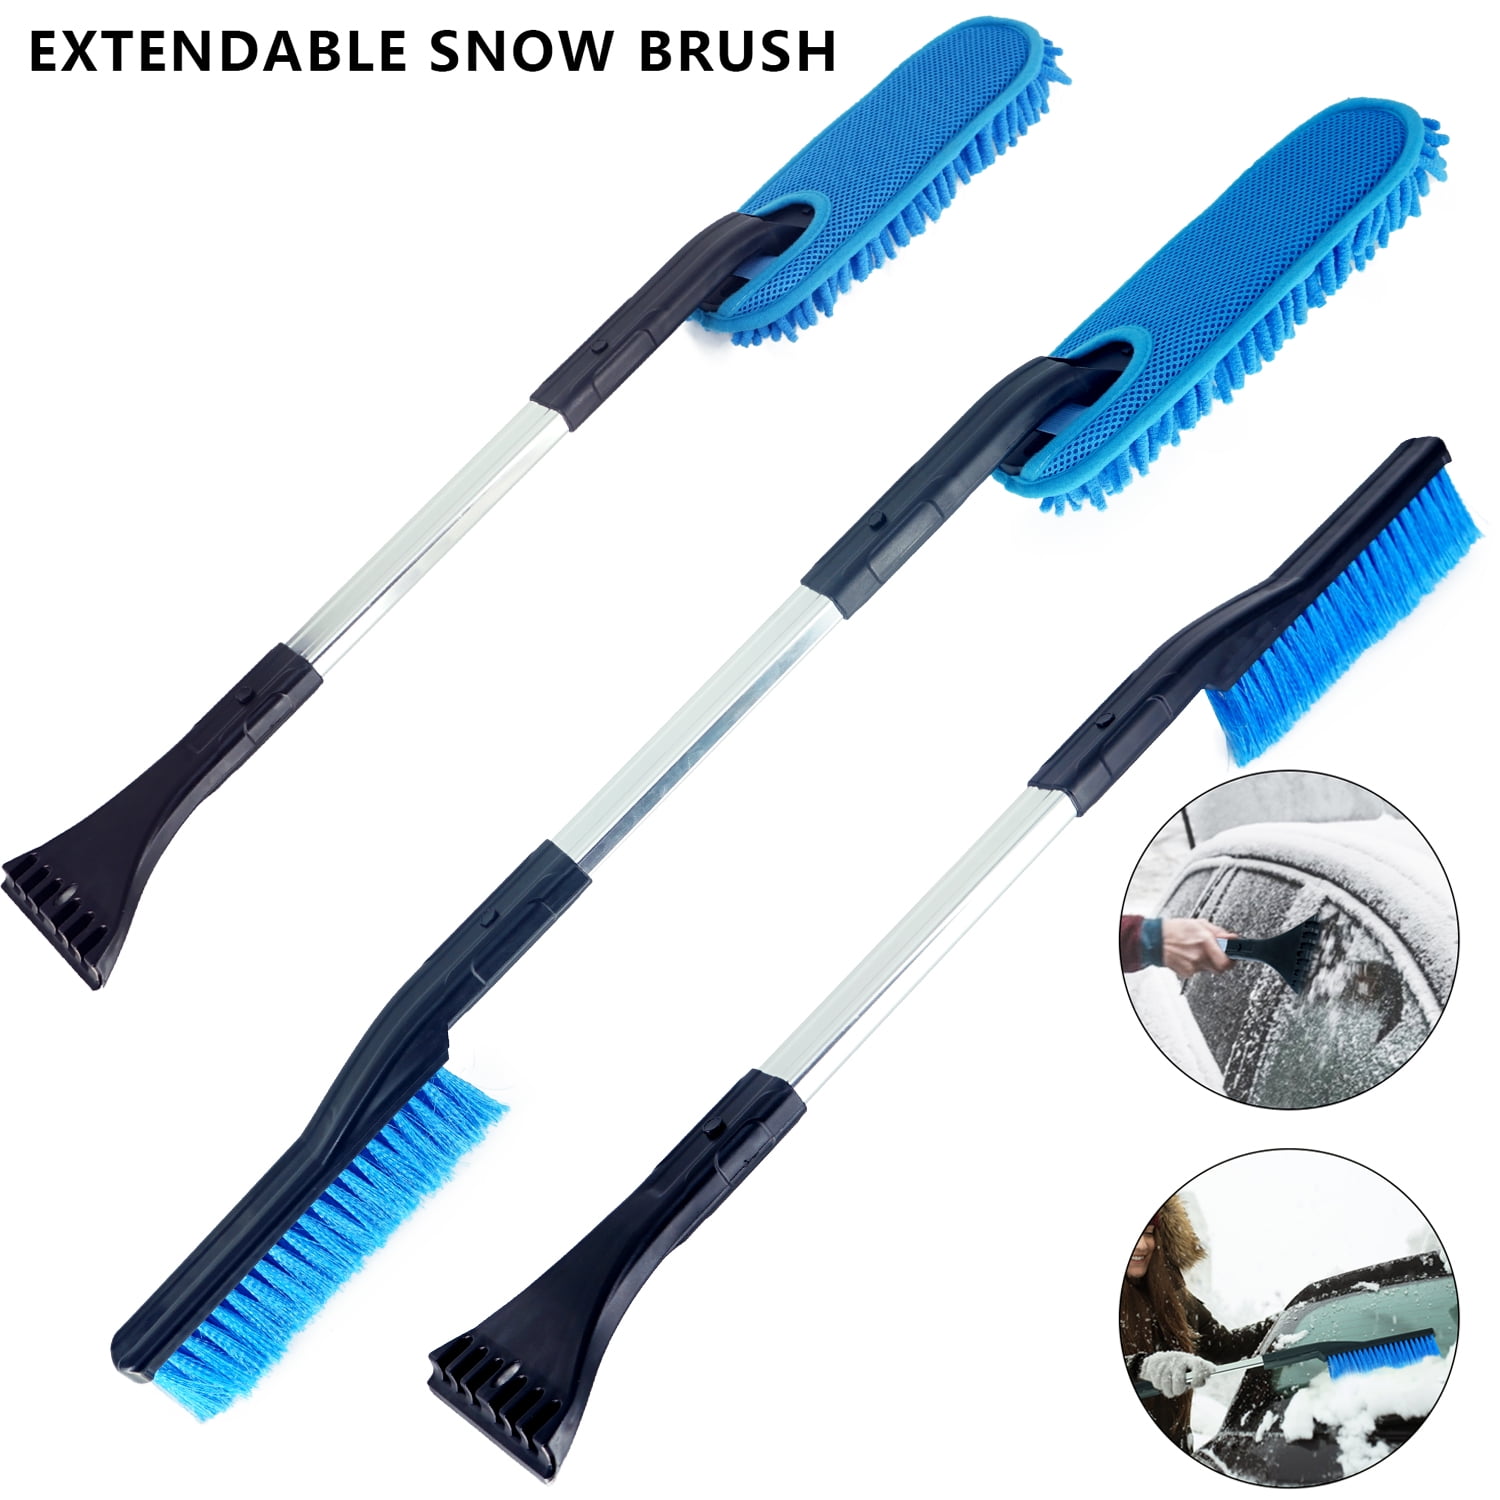 SAYW ICE Scraper for Cars and Small Trucks Snow Brush Snow Removal Shovel and Ice Cleaner Remover Tool,Dang Near Indestructible Ice Scrapers from Scrape Frost and Ice,Car Truck SUV Windshield Black 